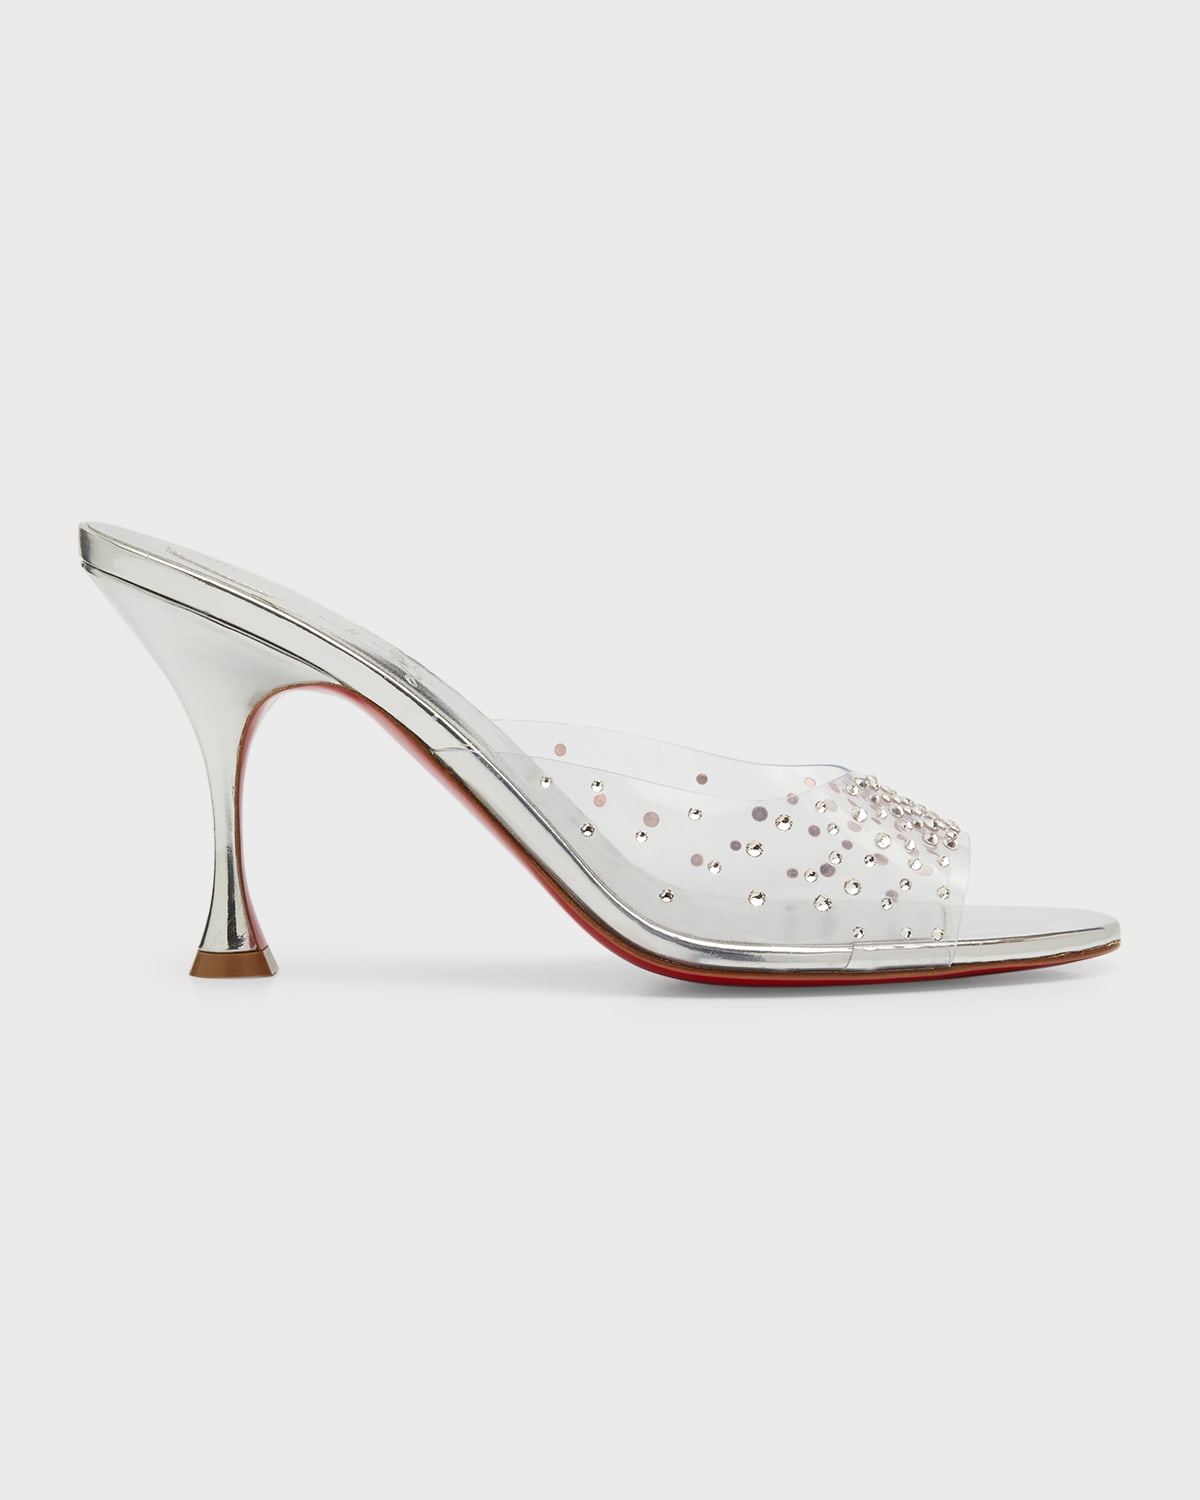 Christian Louboutin Degramule Strass Clear Stiletto Sandals